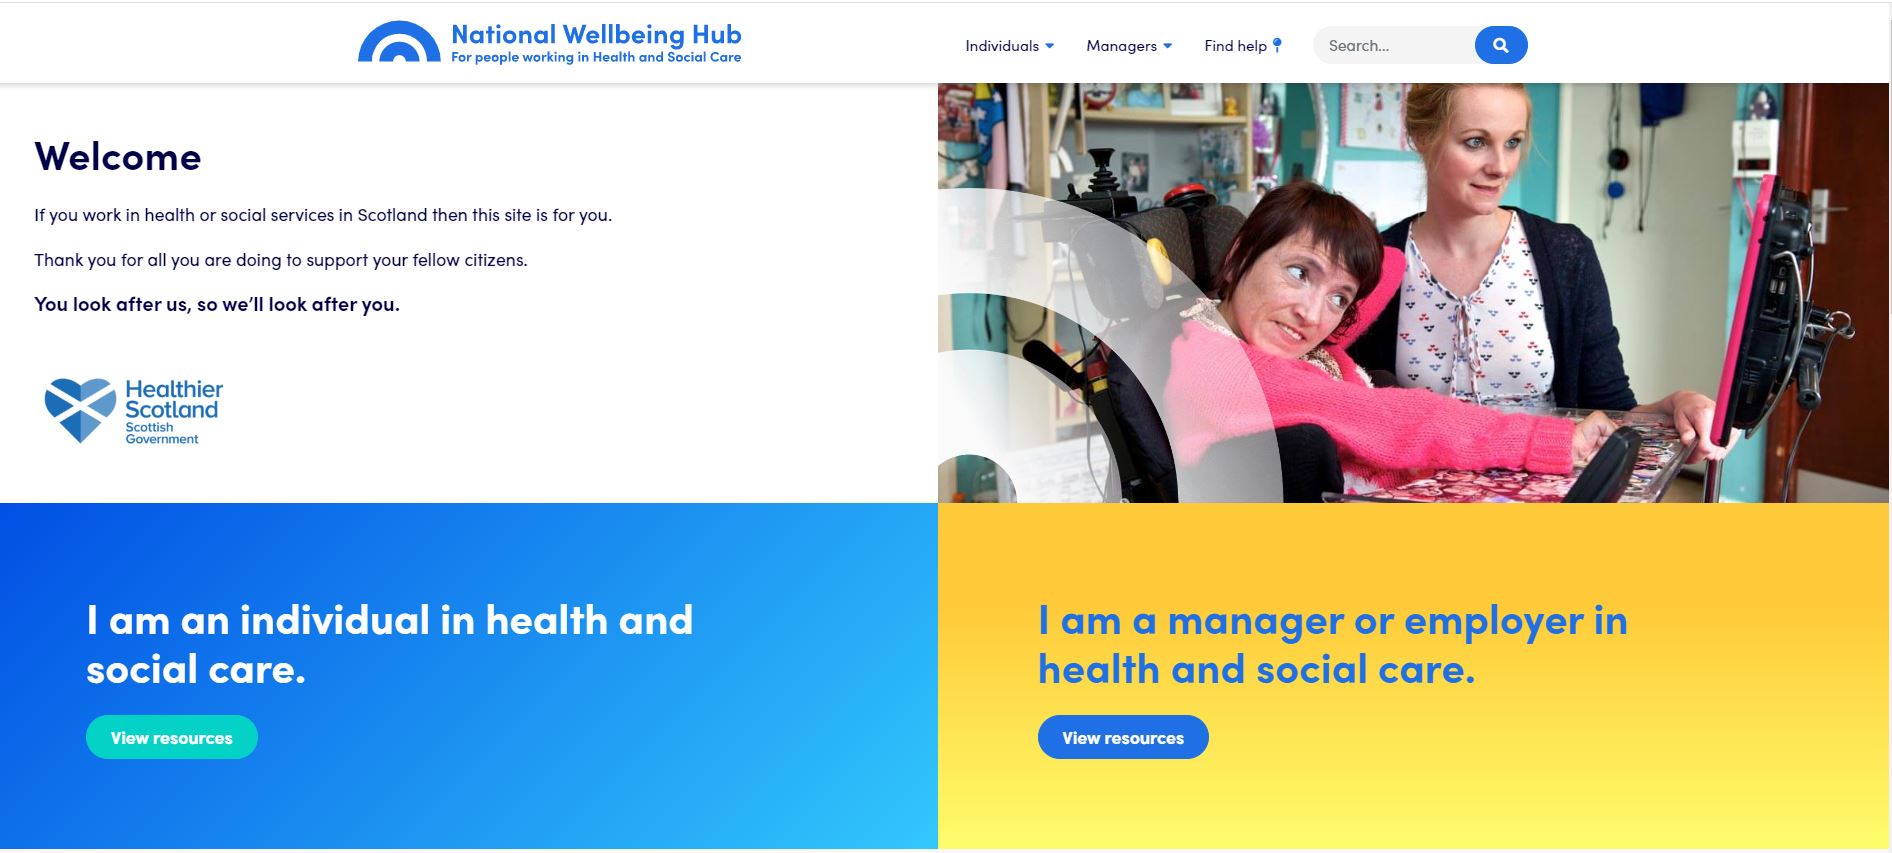 The new National Wellbeing Hub welcome page signposts and directs people to specific resources information for inidviduals within health and social care and another for managers or employers in health and social care 